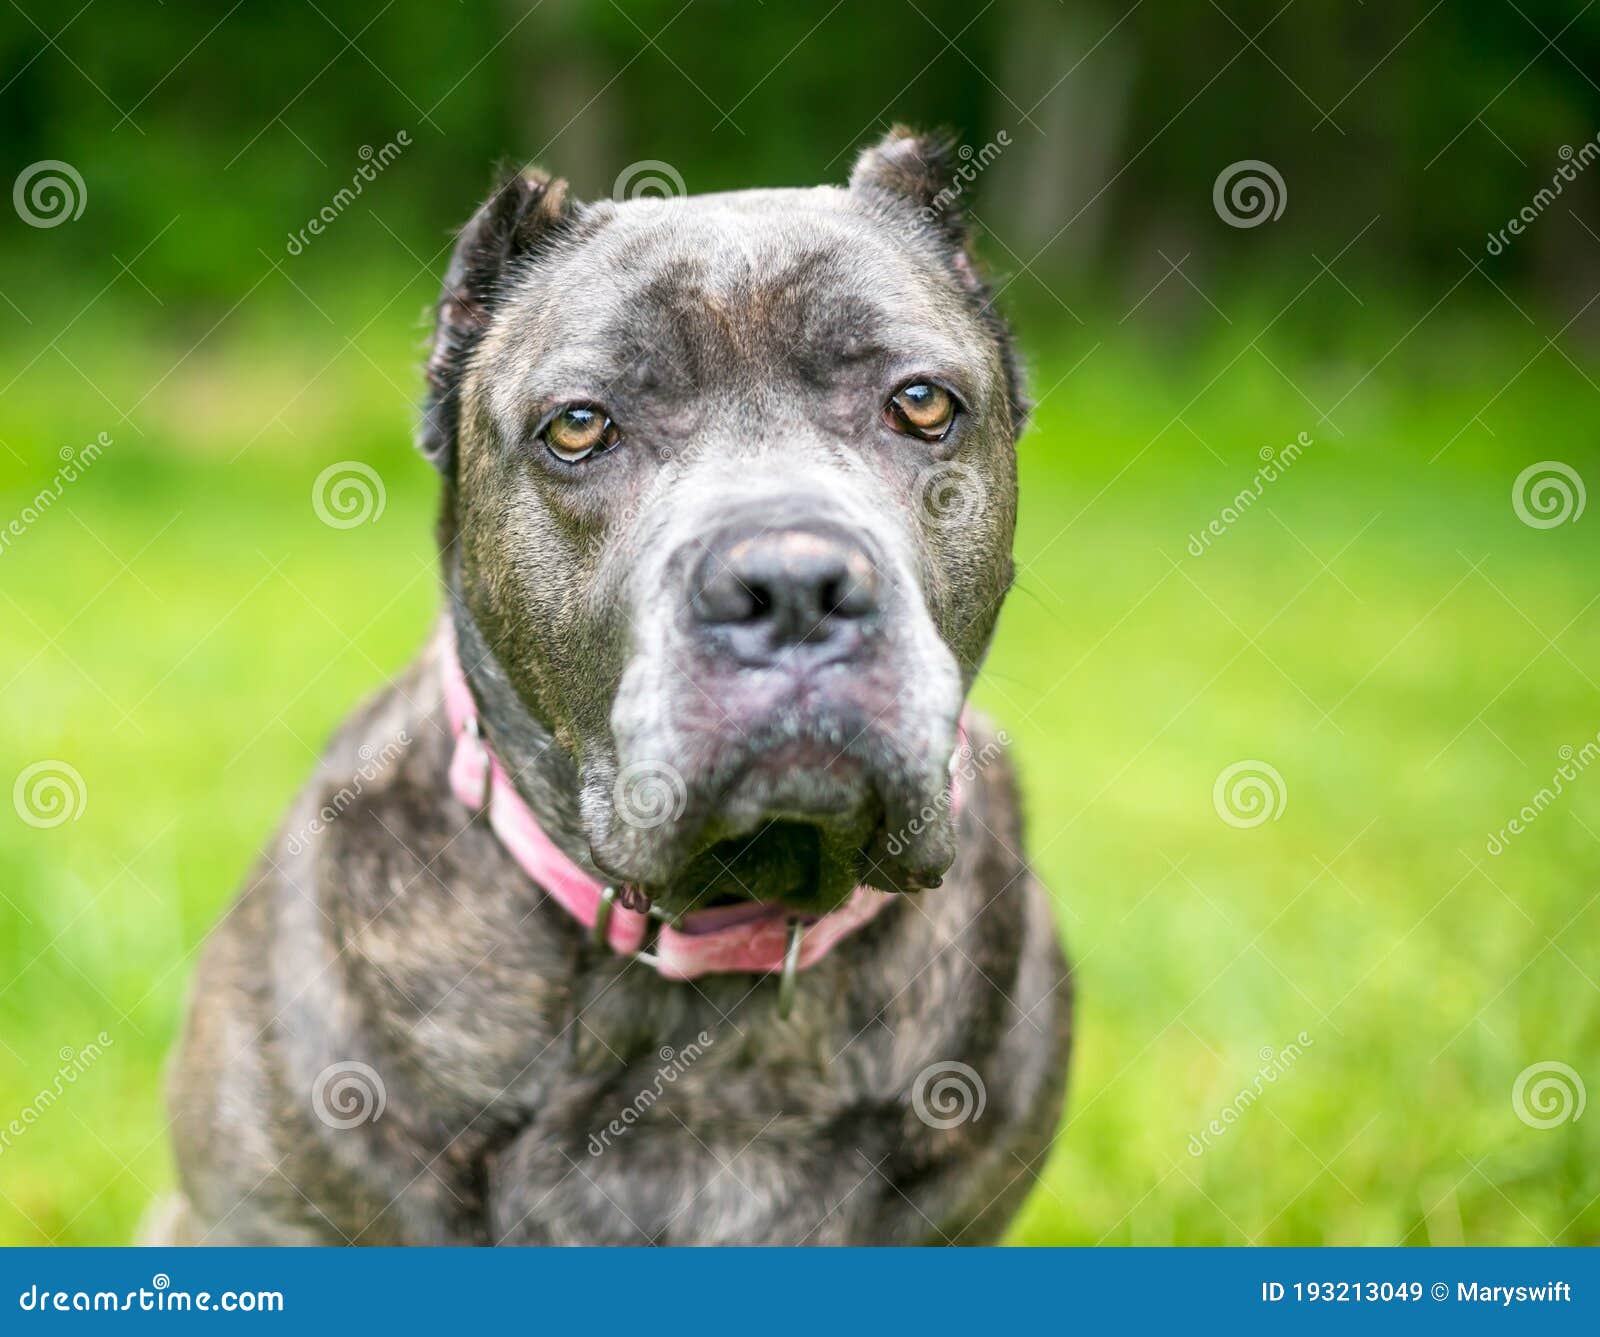 A Cane Corso Mixed Breed Dog with Cropped Ears and a